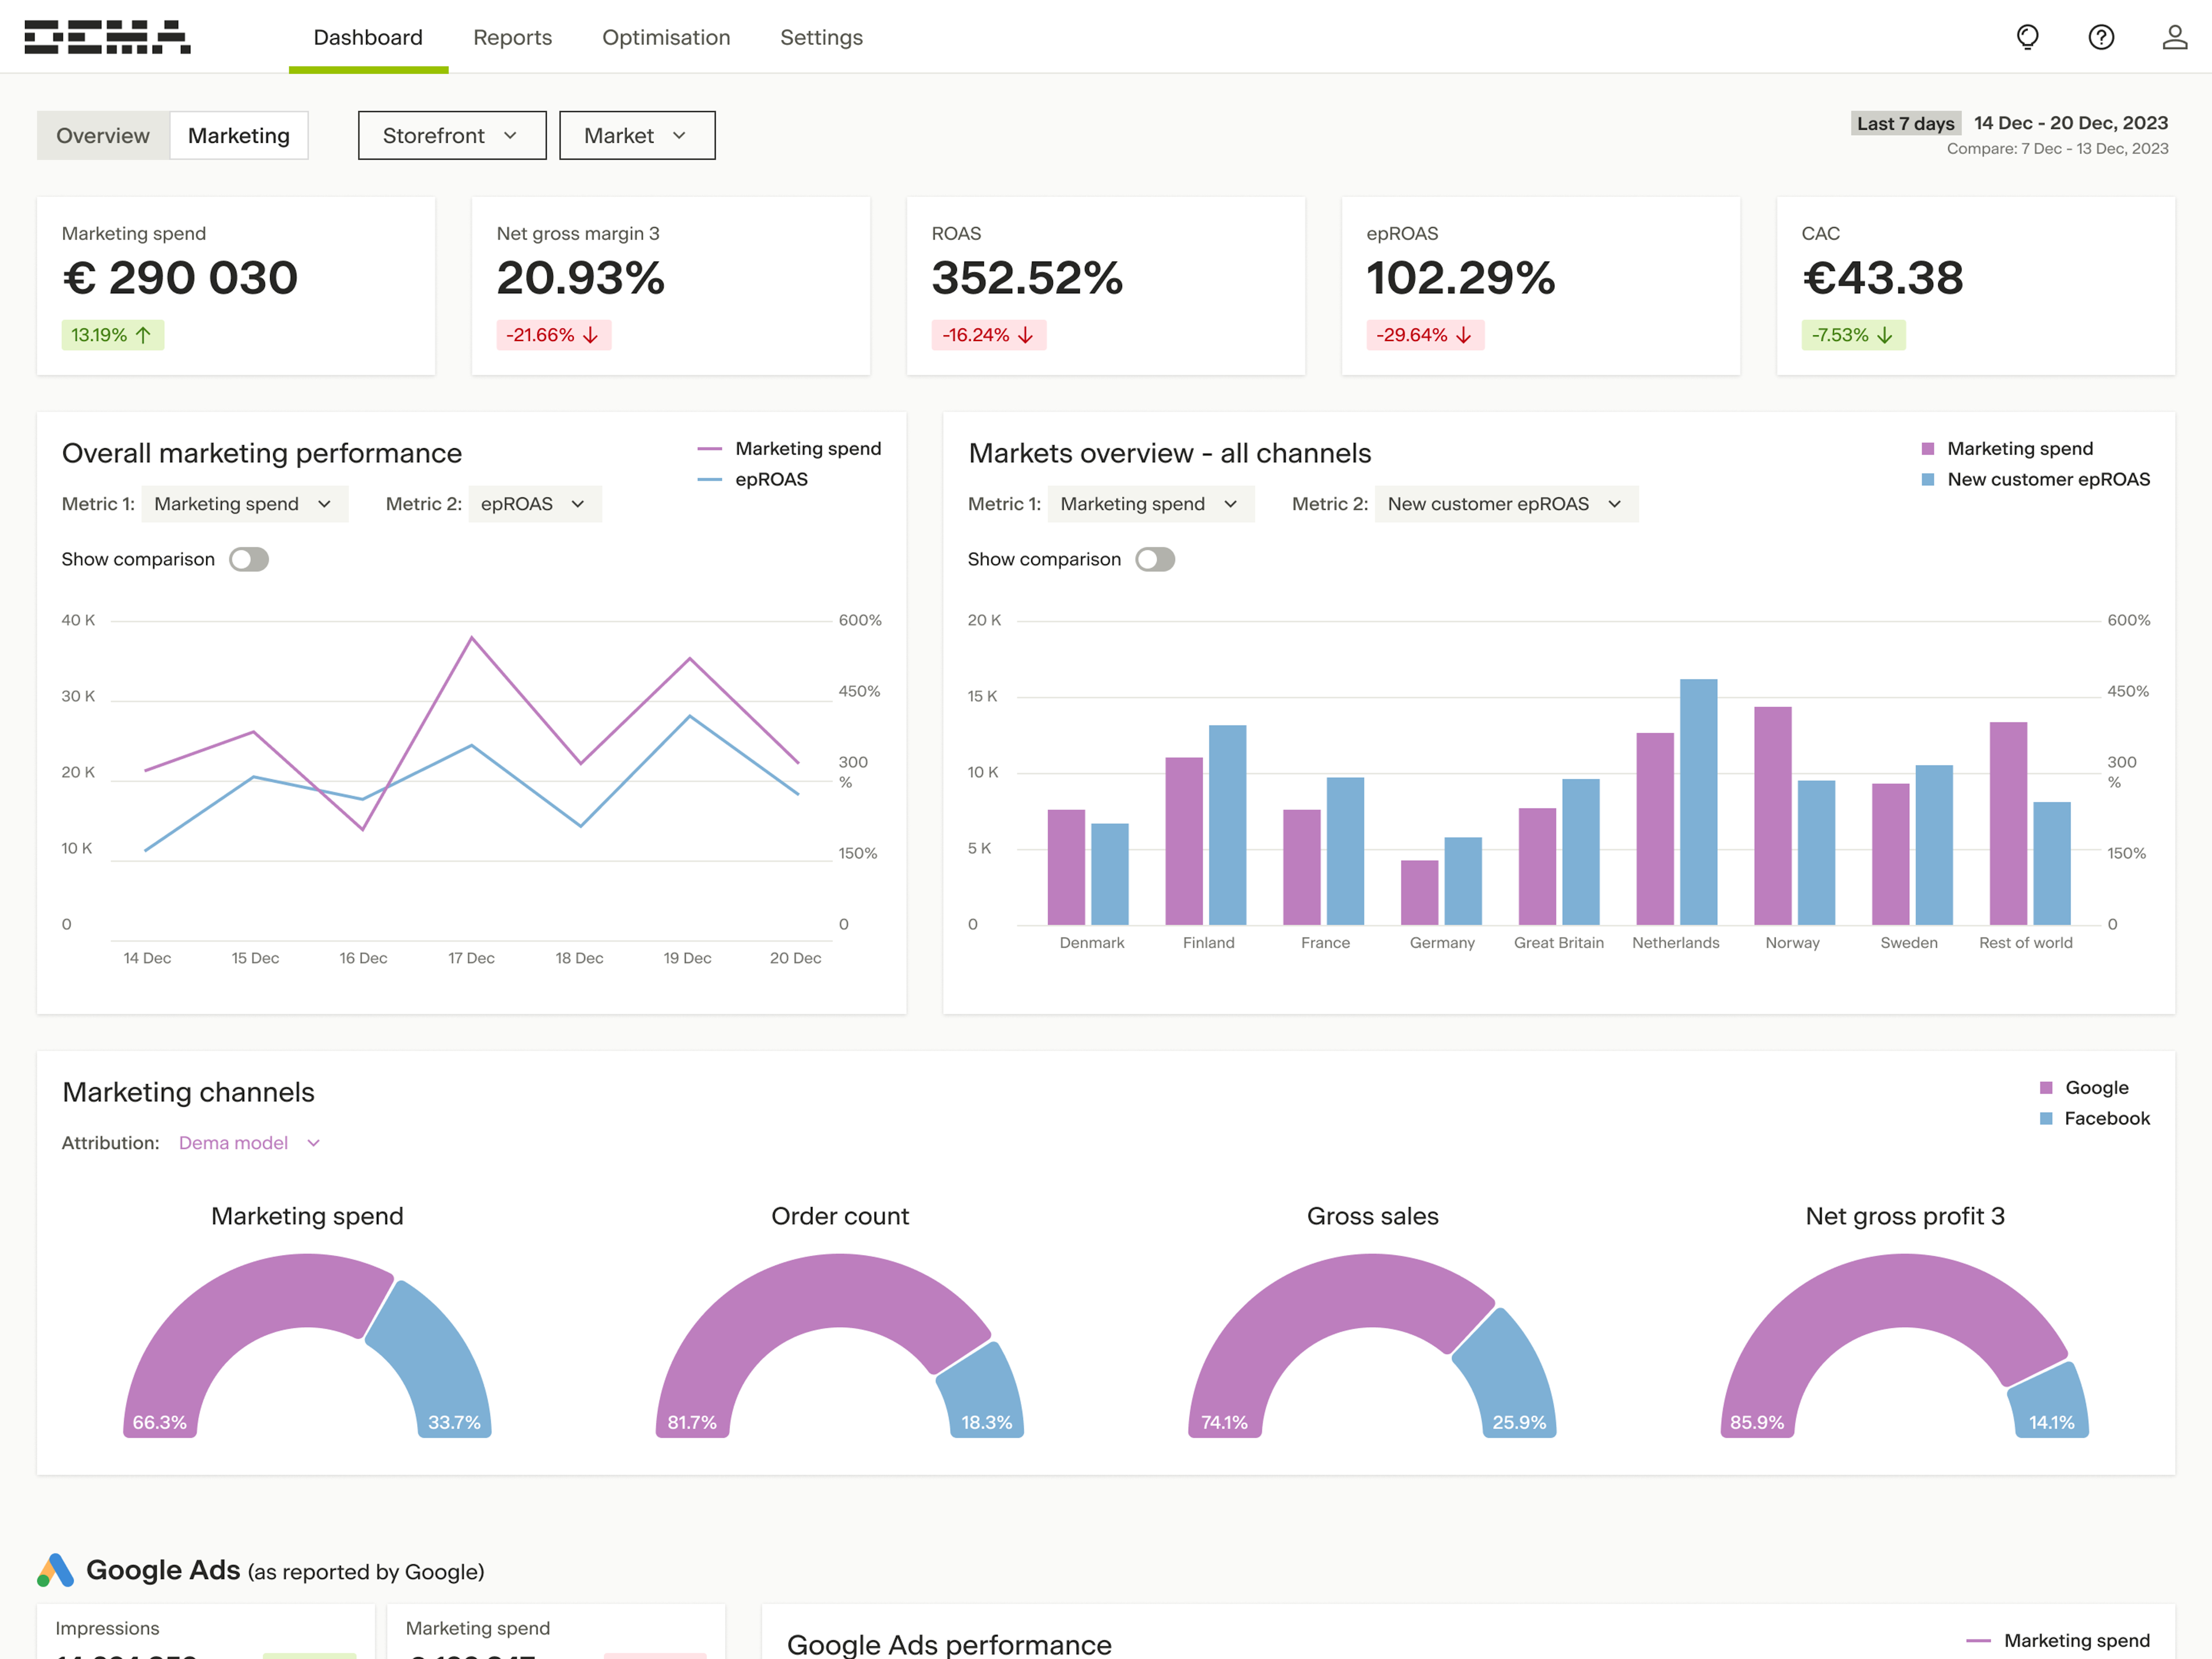 Dashboard showing different marketing performance widgets and visualisations